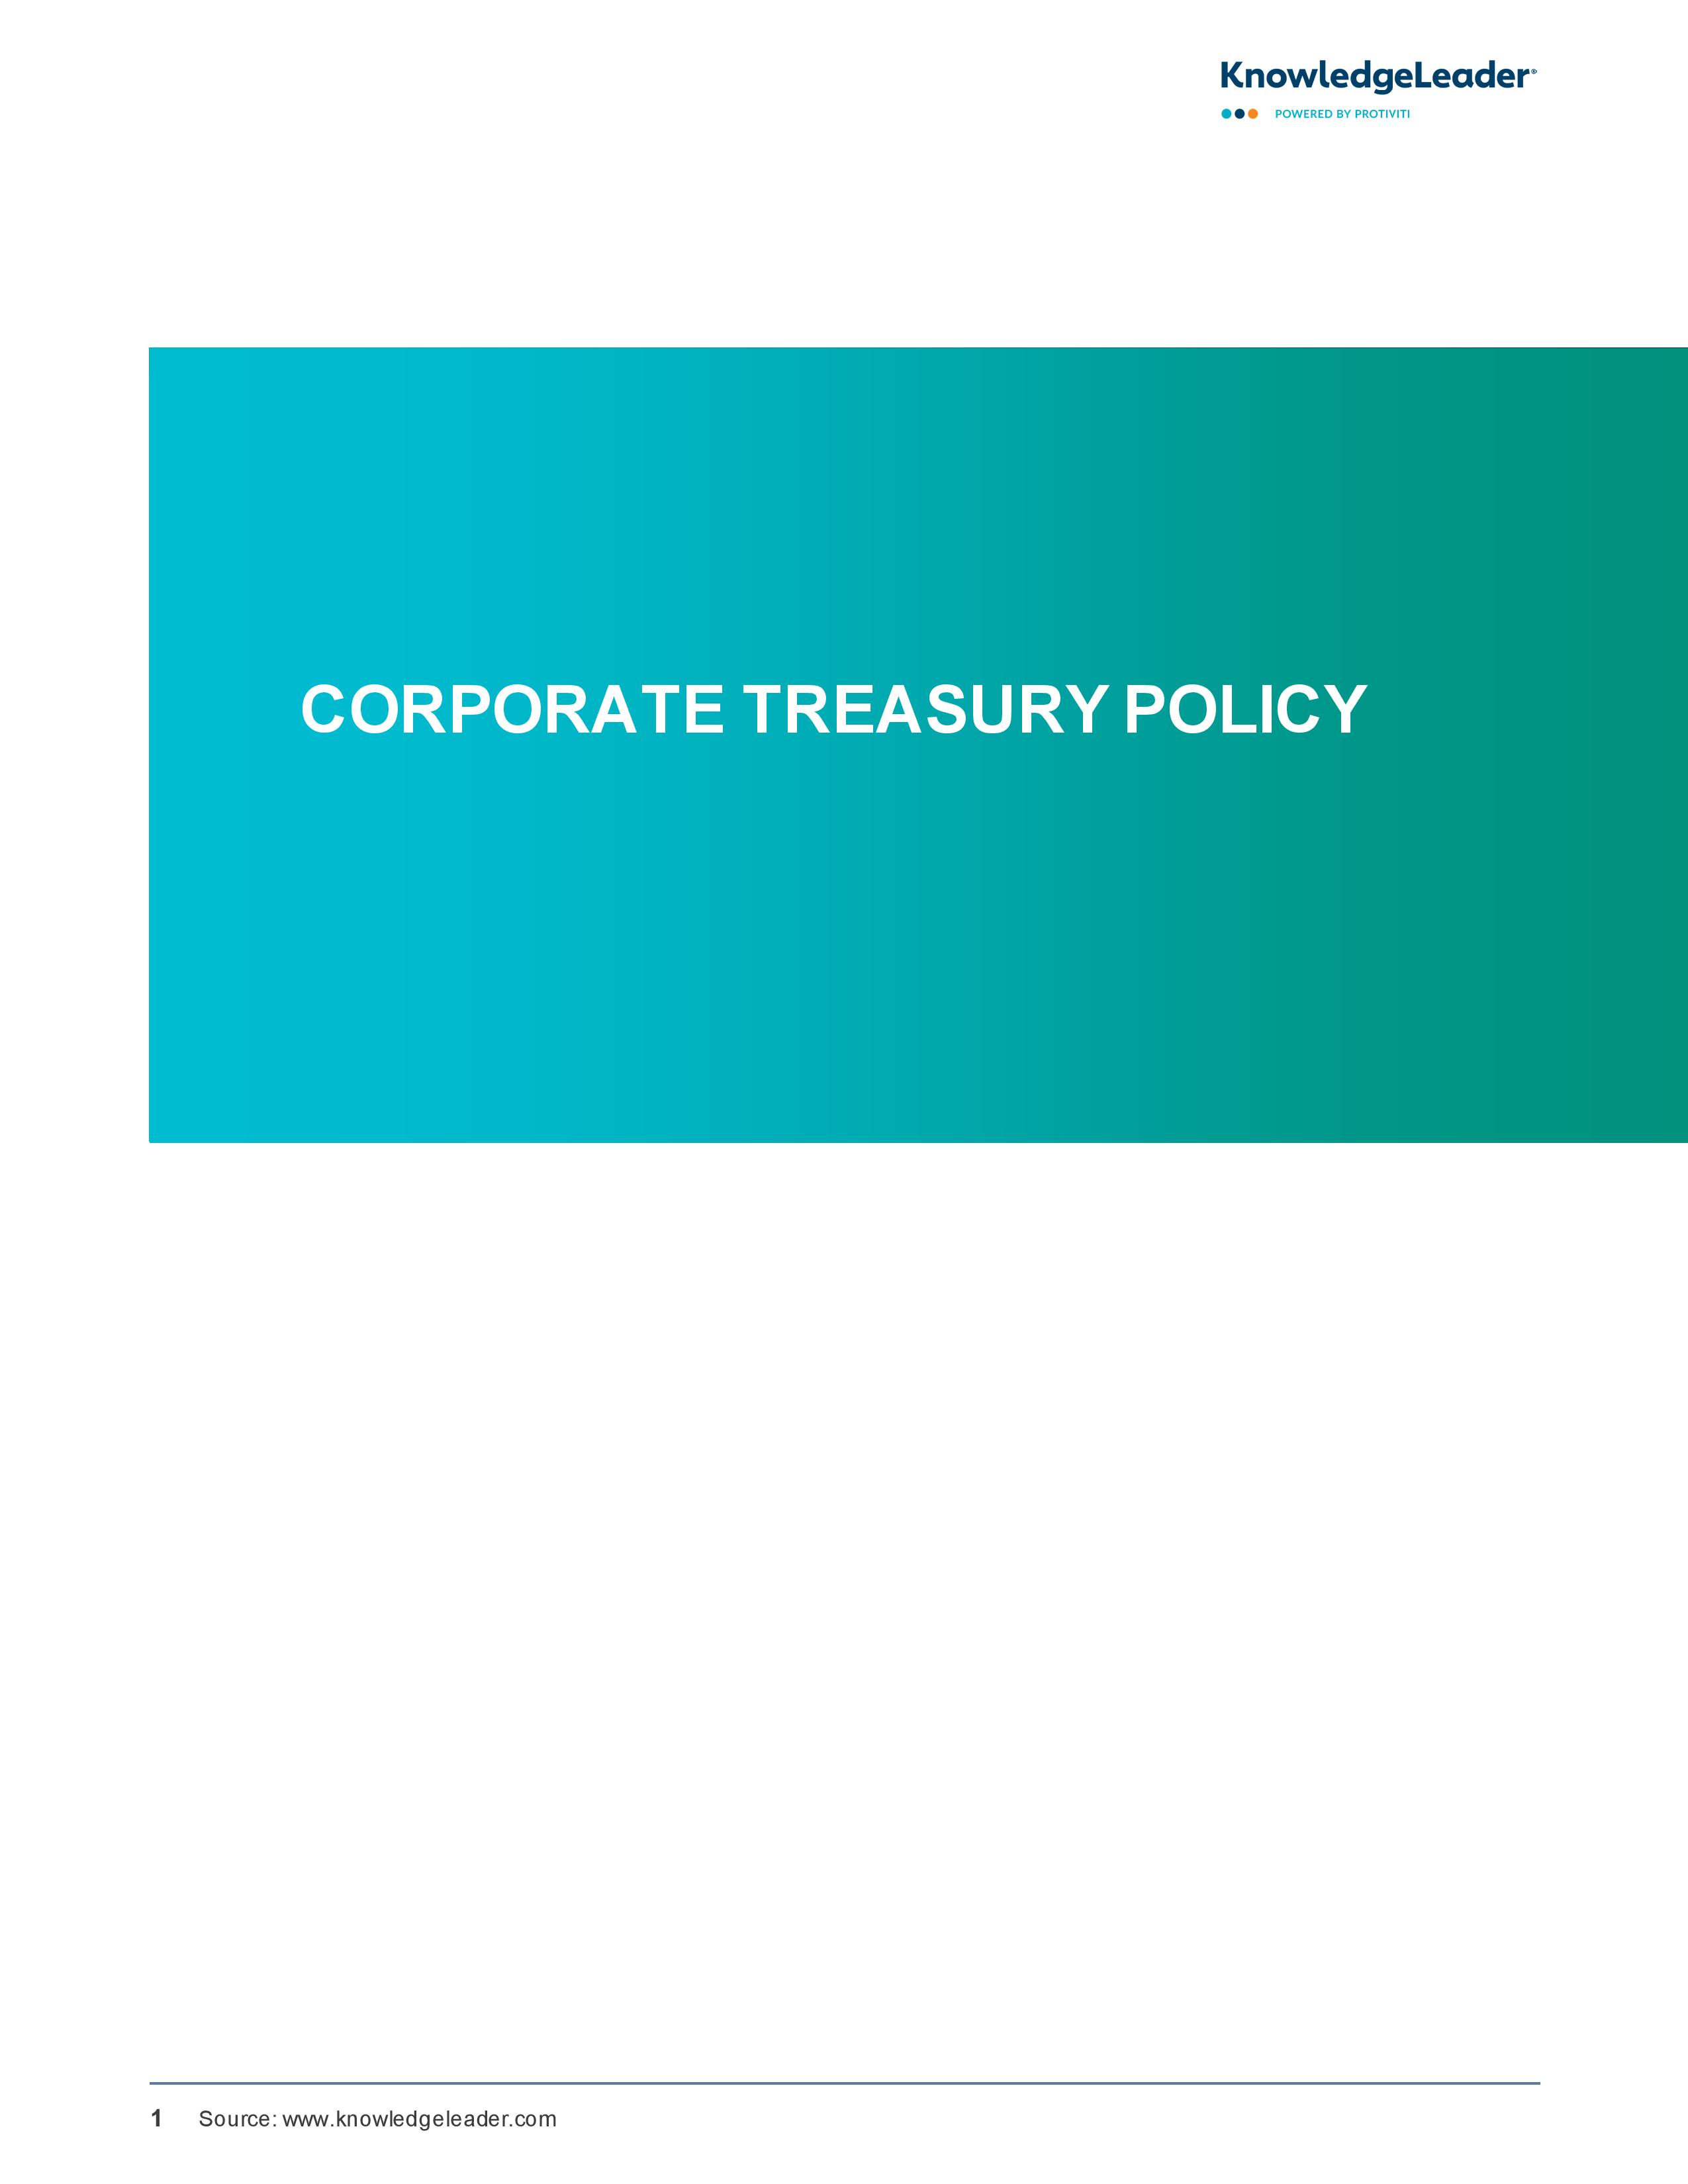 screenshot of the first page of Corporate Treasury Policy